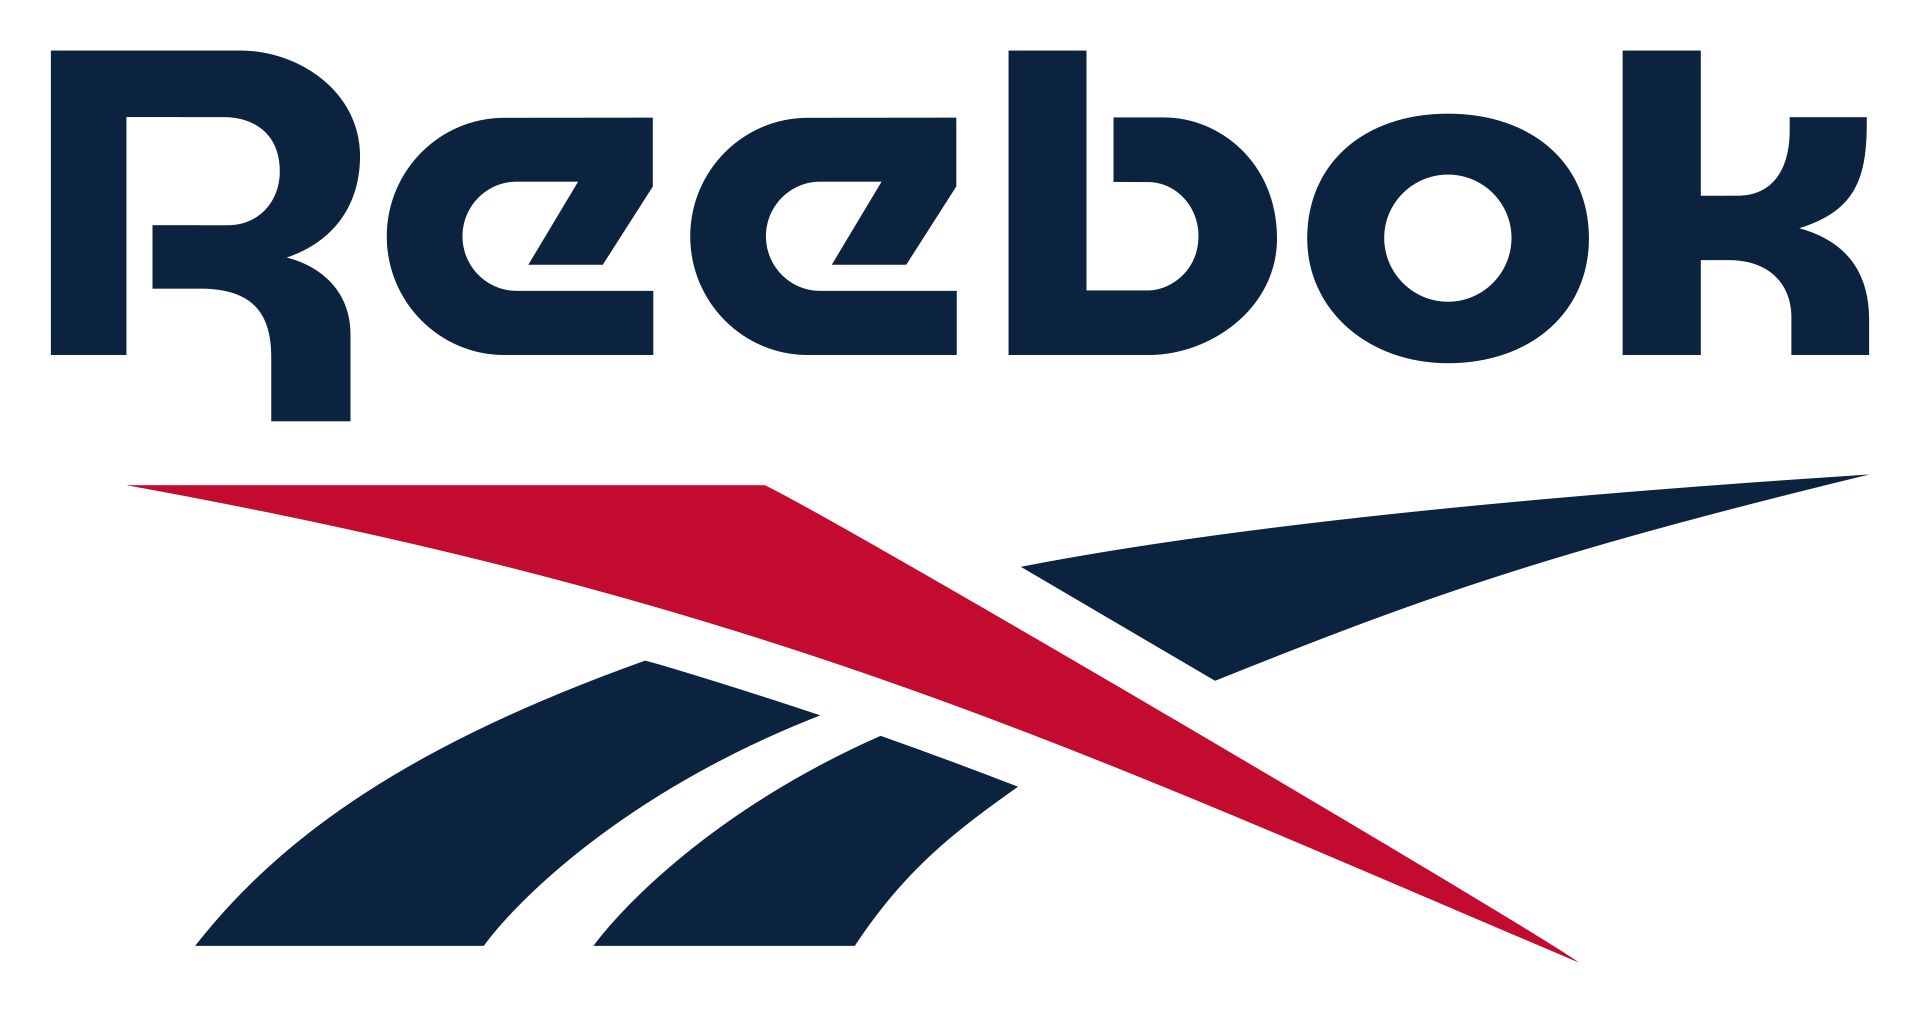 New Logo and Identity for Reebok done In-house with Darrin Crescenzi